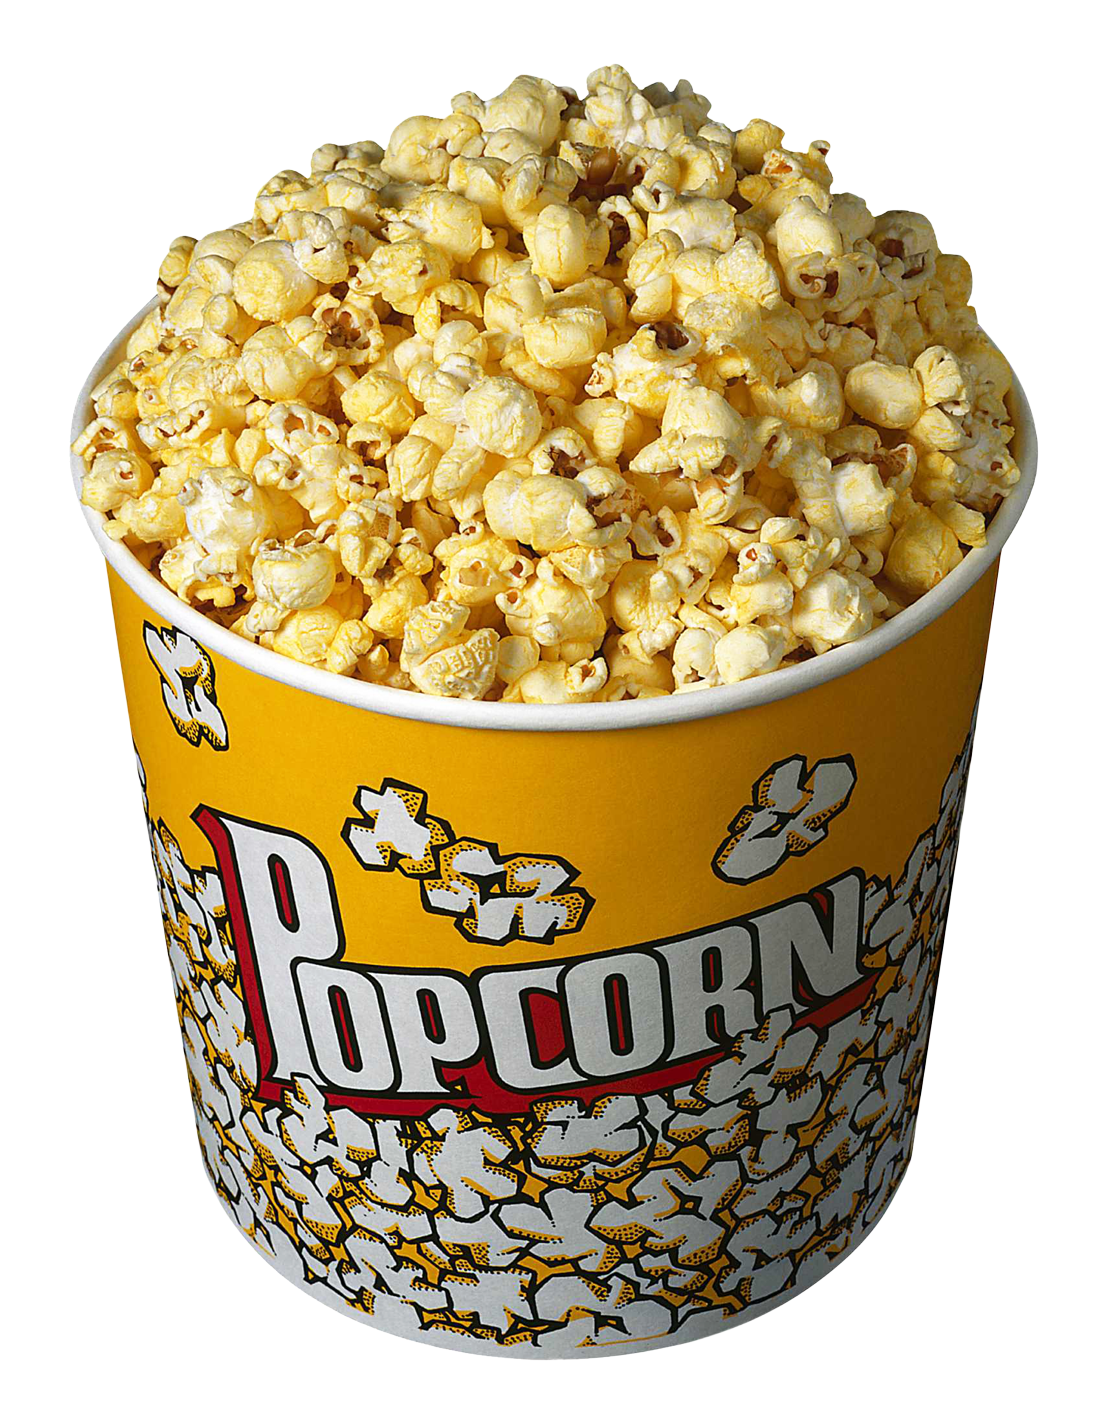 Buttered Popcornin Yellow Bucket PNG image